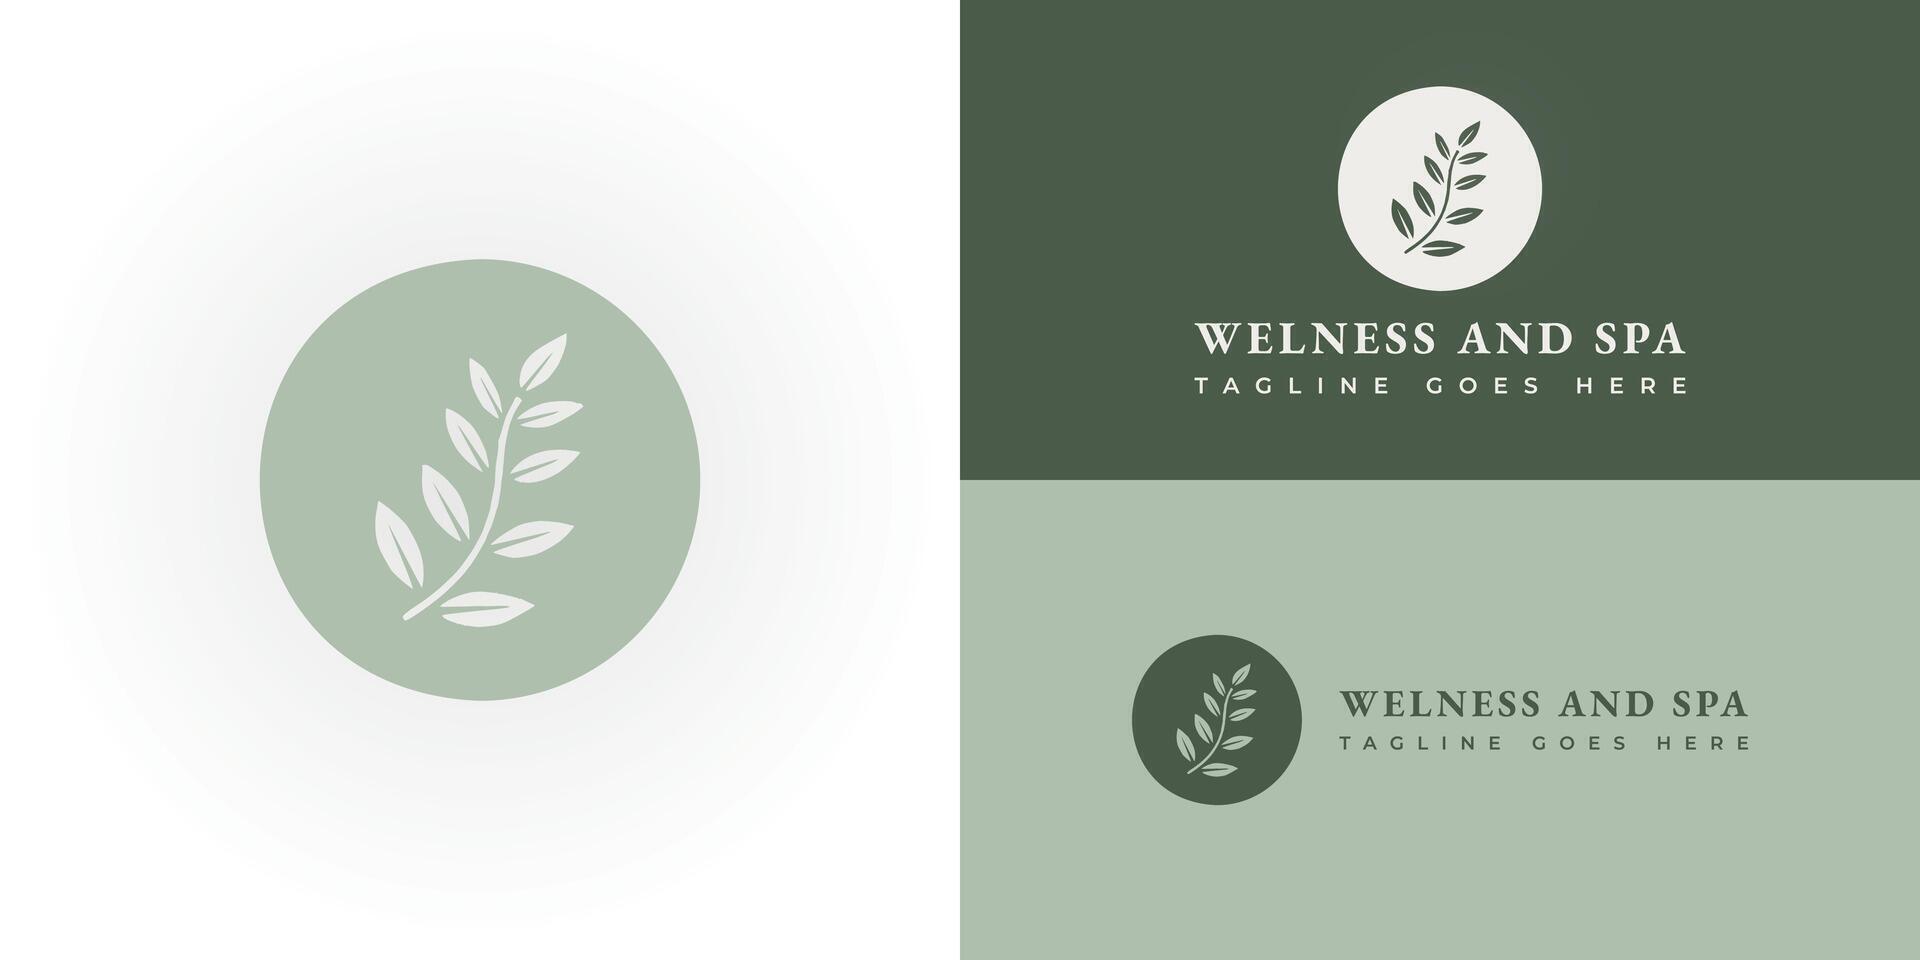 Olive Oil Flower Logo applied for Beauty and Spa Company Logo. Logo of olives on a branch. Modern logo inline style on the color spot. Minimalistic floral vector illustration.